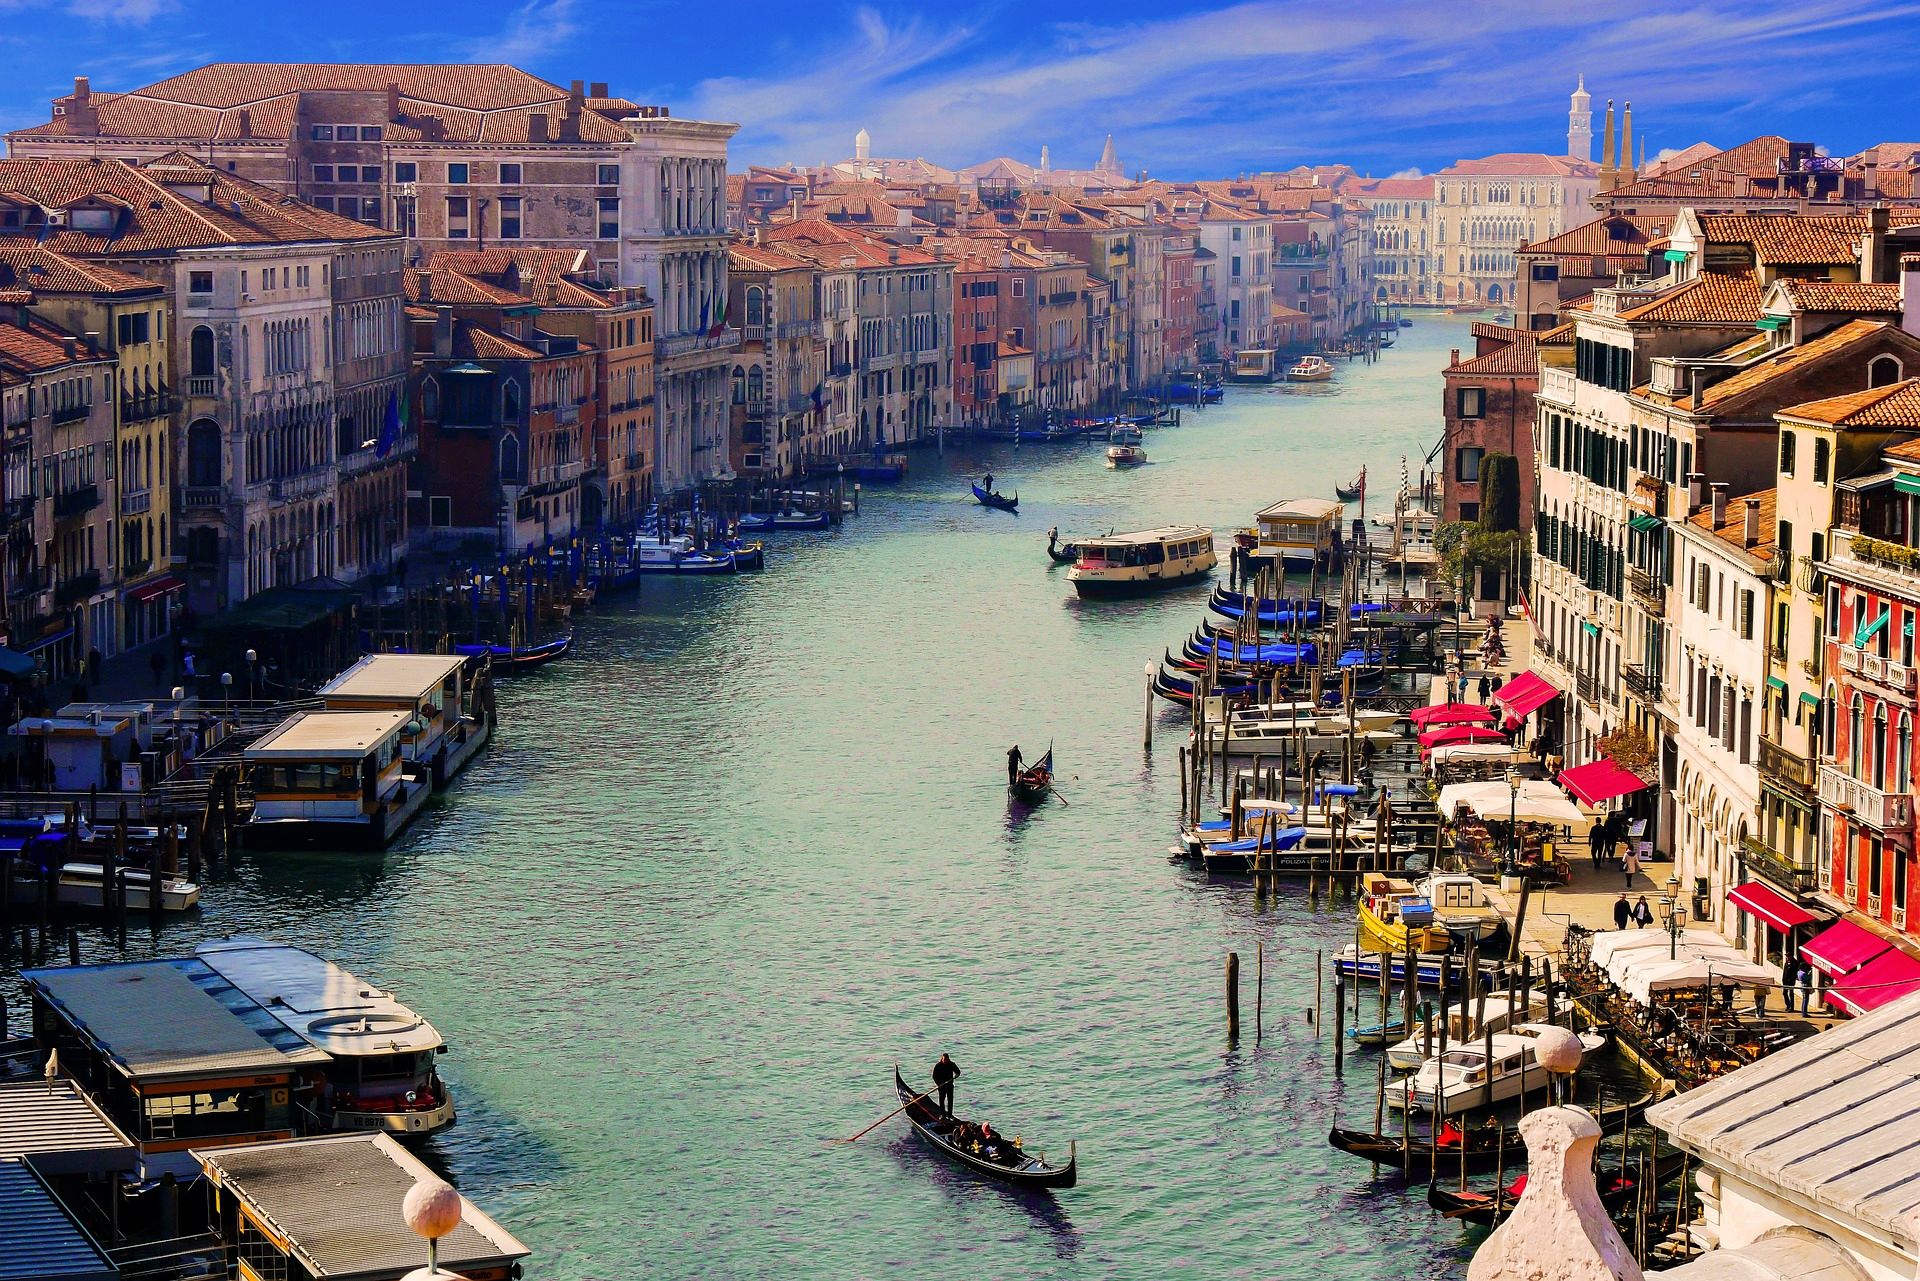 Venice to introduce new measures against overtourism